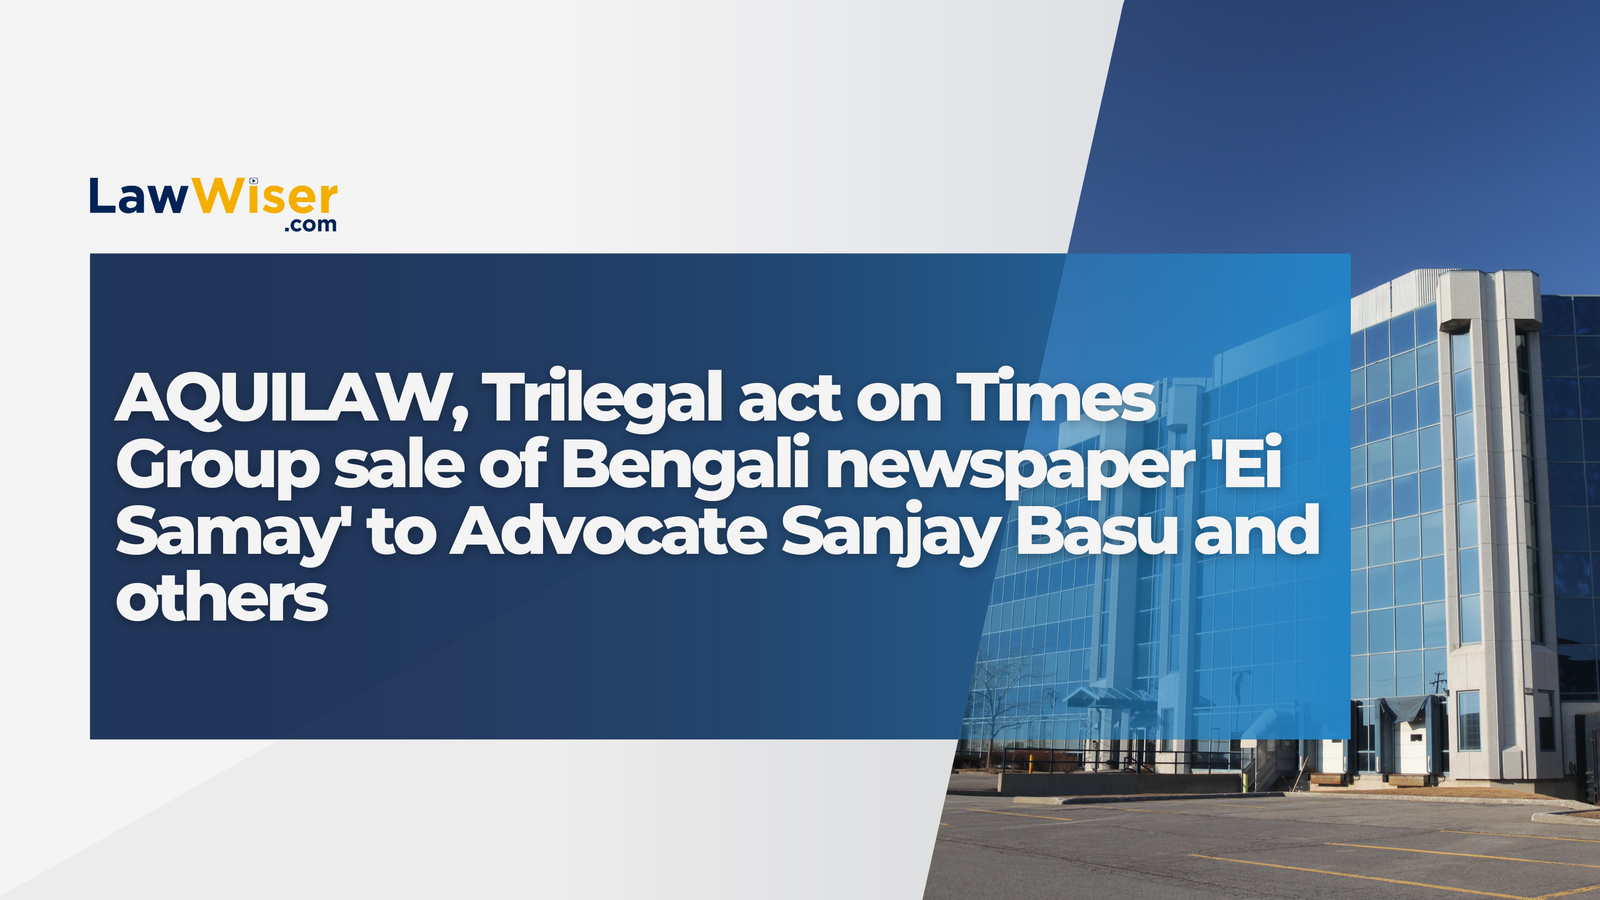 AQUILAW, Trilegal act on Times Group sale of Bengali newspaper ‘Ei Samay’ to Advocate Sanjay Basu and others